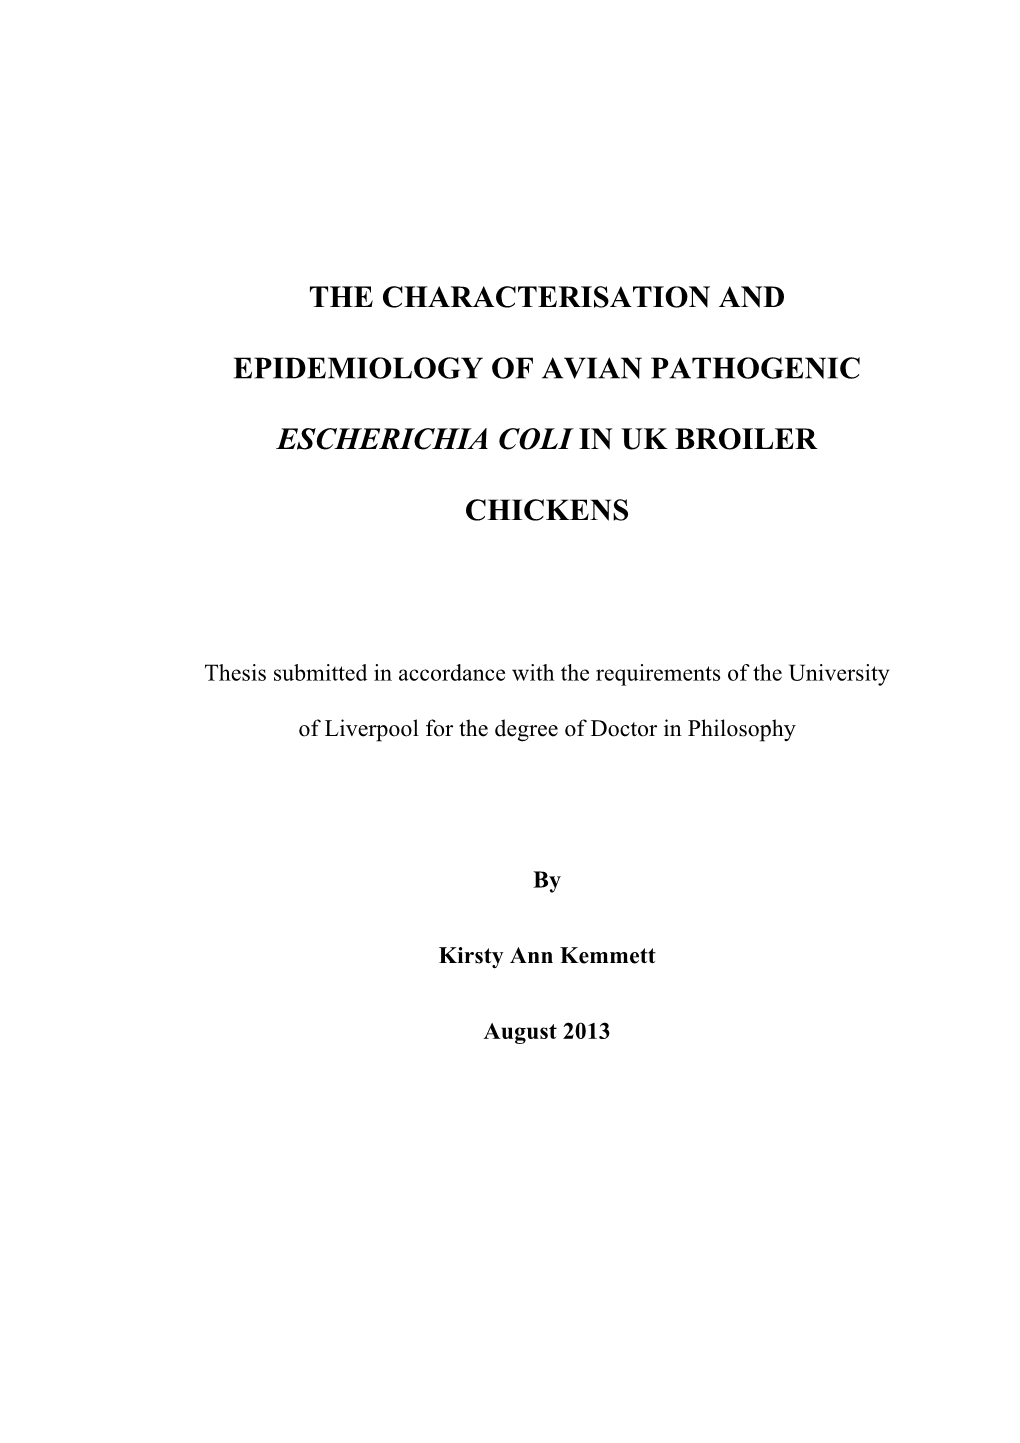 The Characterisation and Epidemiology of Avian Pathogenic Escherichia Coli in UK Broiler Chickens